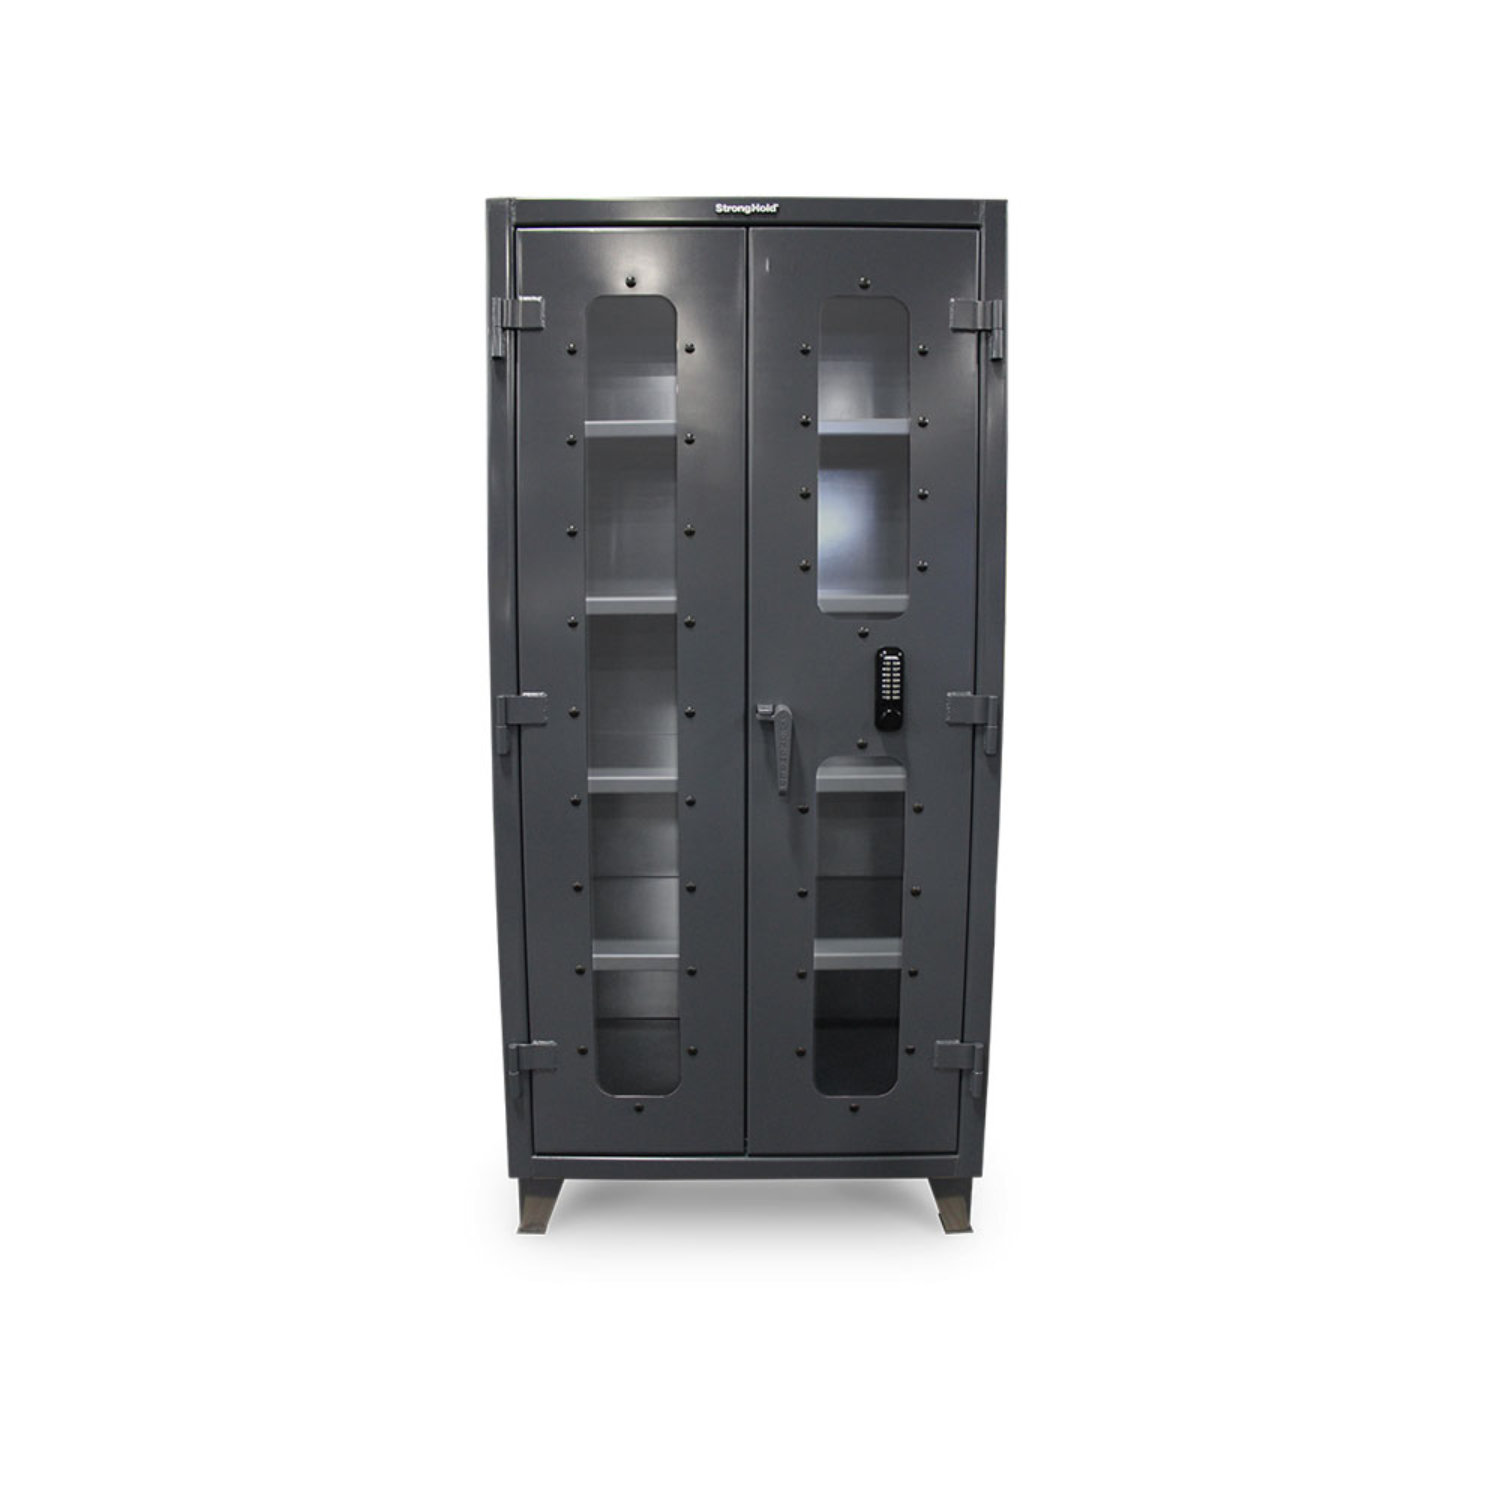 https://madeinusatools.com/wp-content/uploads/2020/06/clear-view-cabinet-with-keypad.jpg